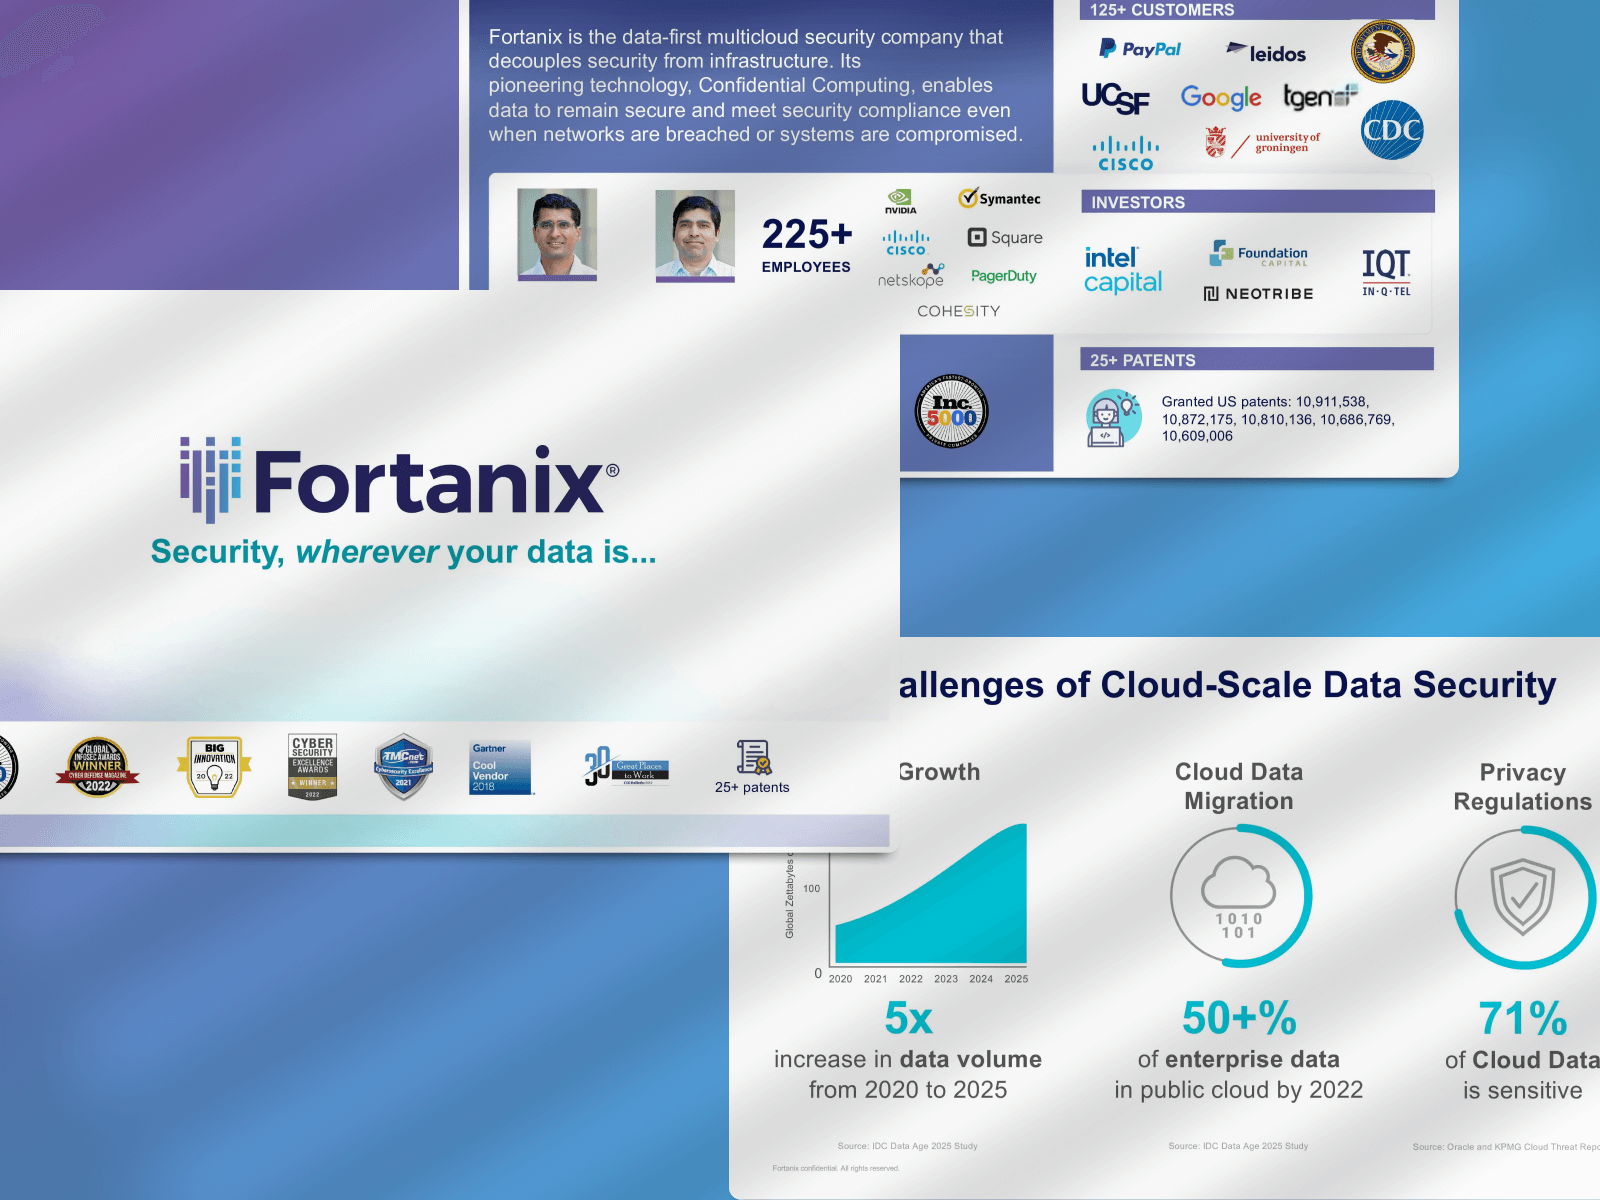 This pitch deck landed Fortanix $90M for Goldman Sachs